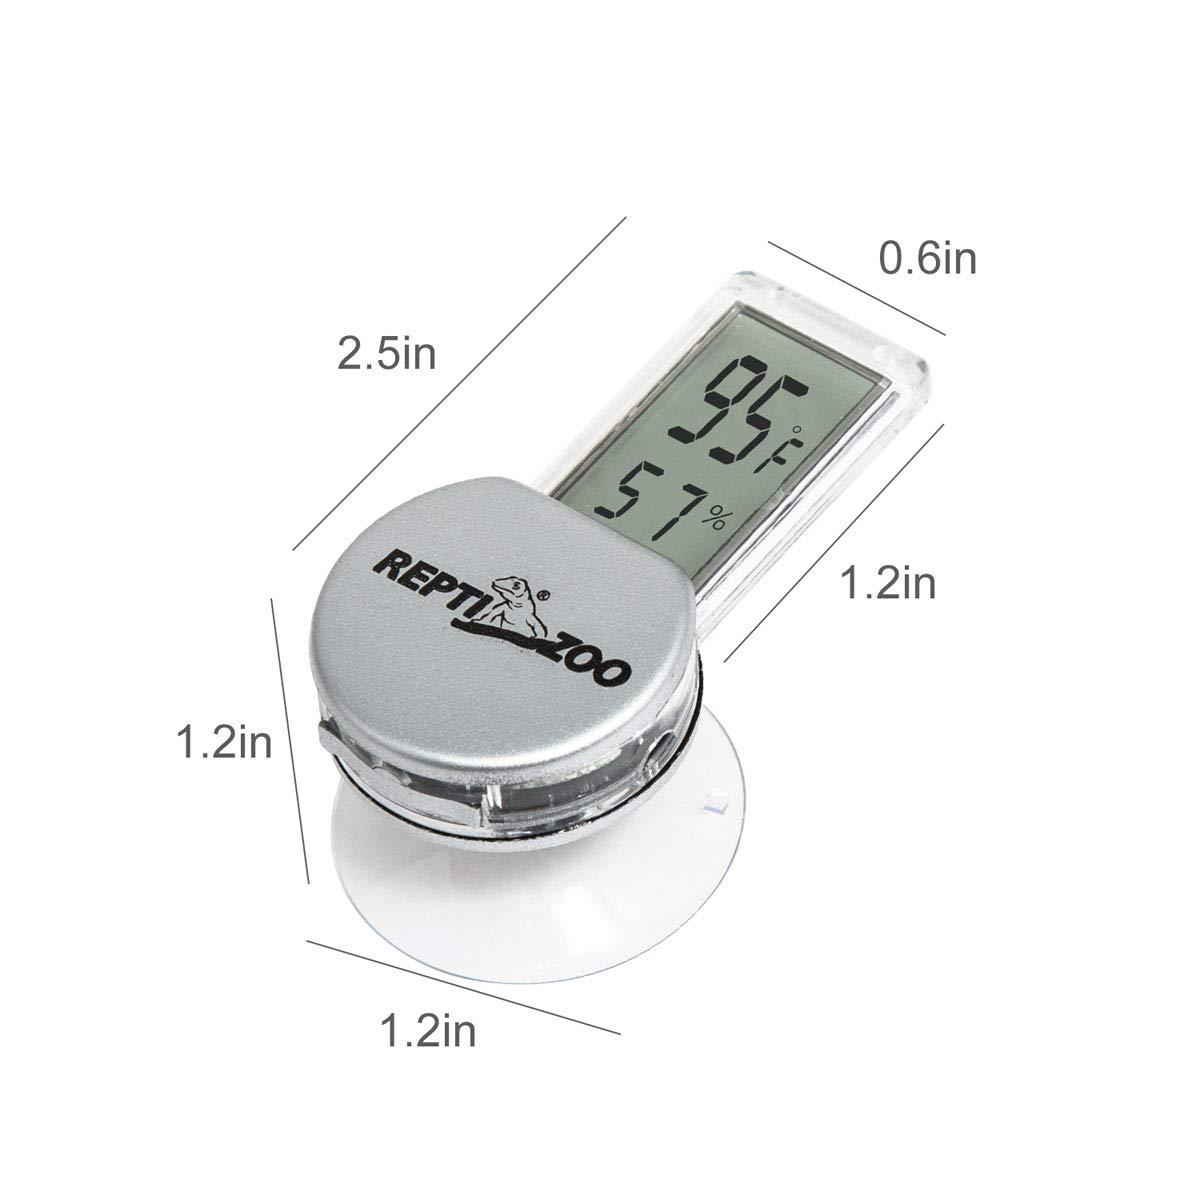 REPTI ZOO Upgraded Reptile Terrarium Thermometer Hygrometer,Digital Pet  Temperature and Humidity Gauge with Suction Cup for Reptile Rearing Box